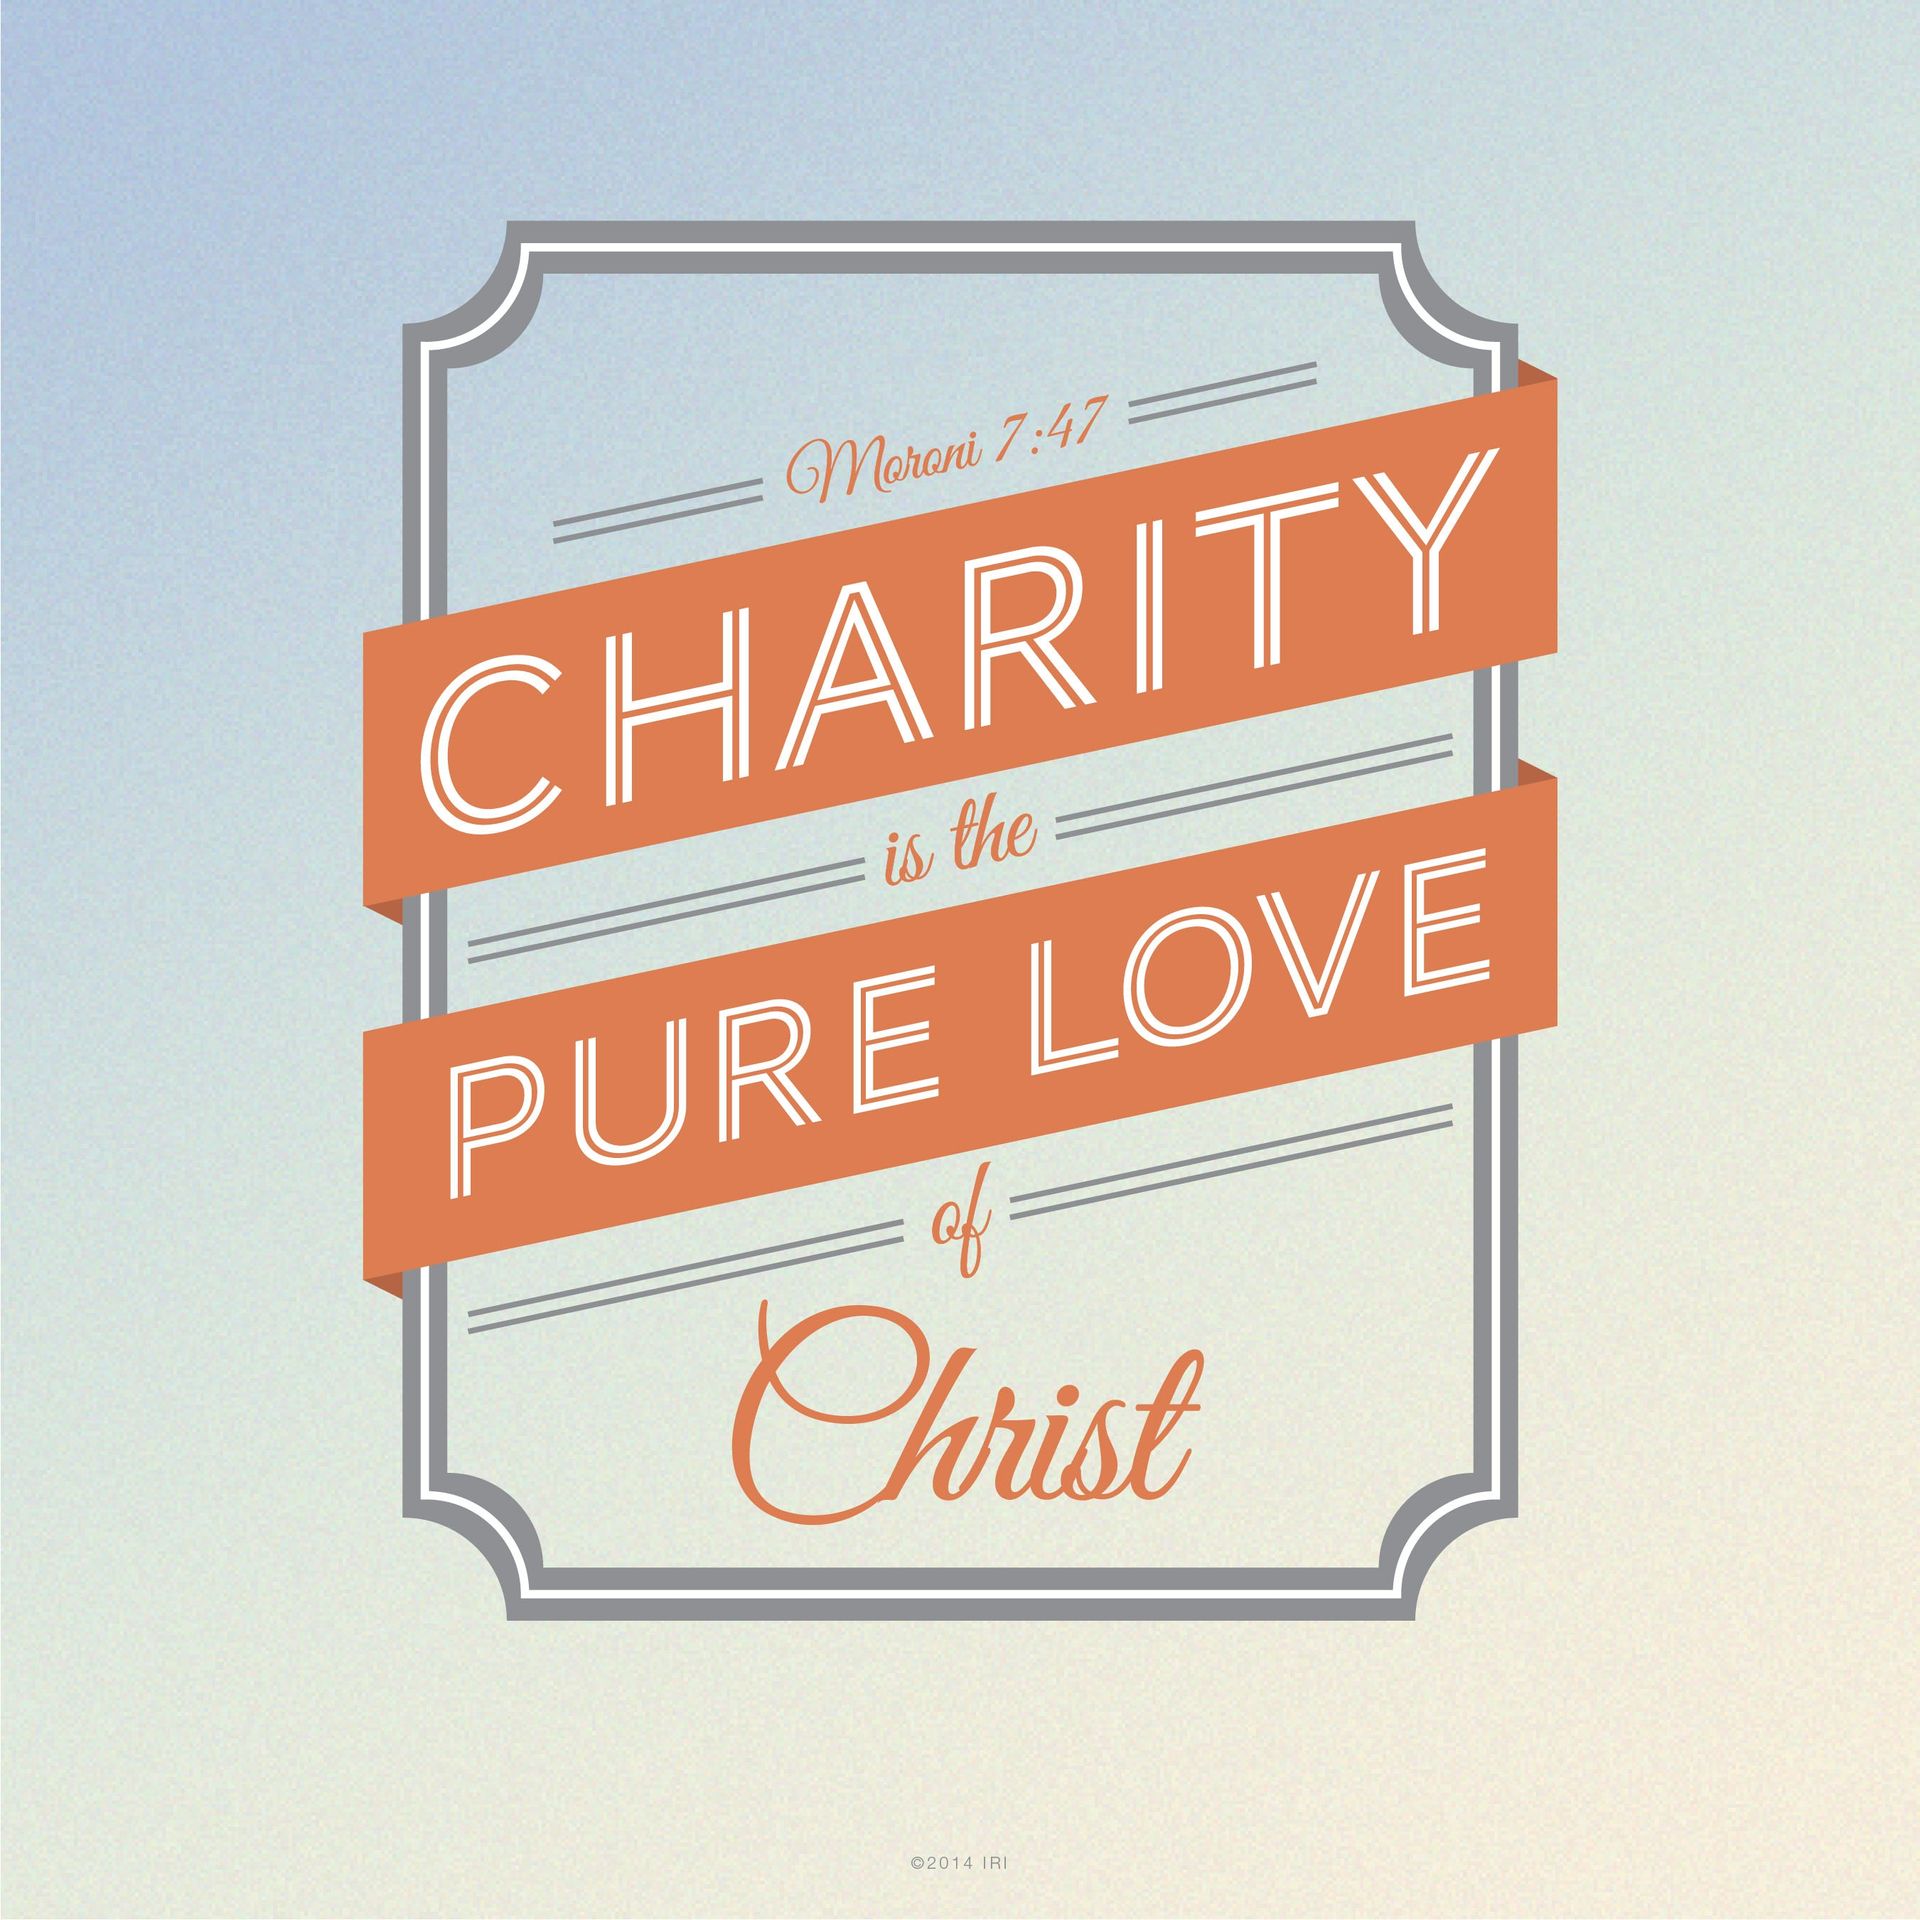 “Charity is the pure love of Christ.”—Moroni 7:47.